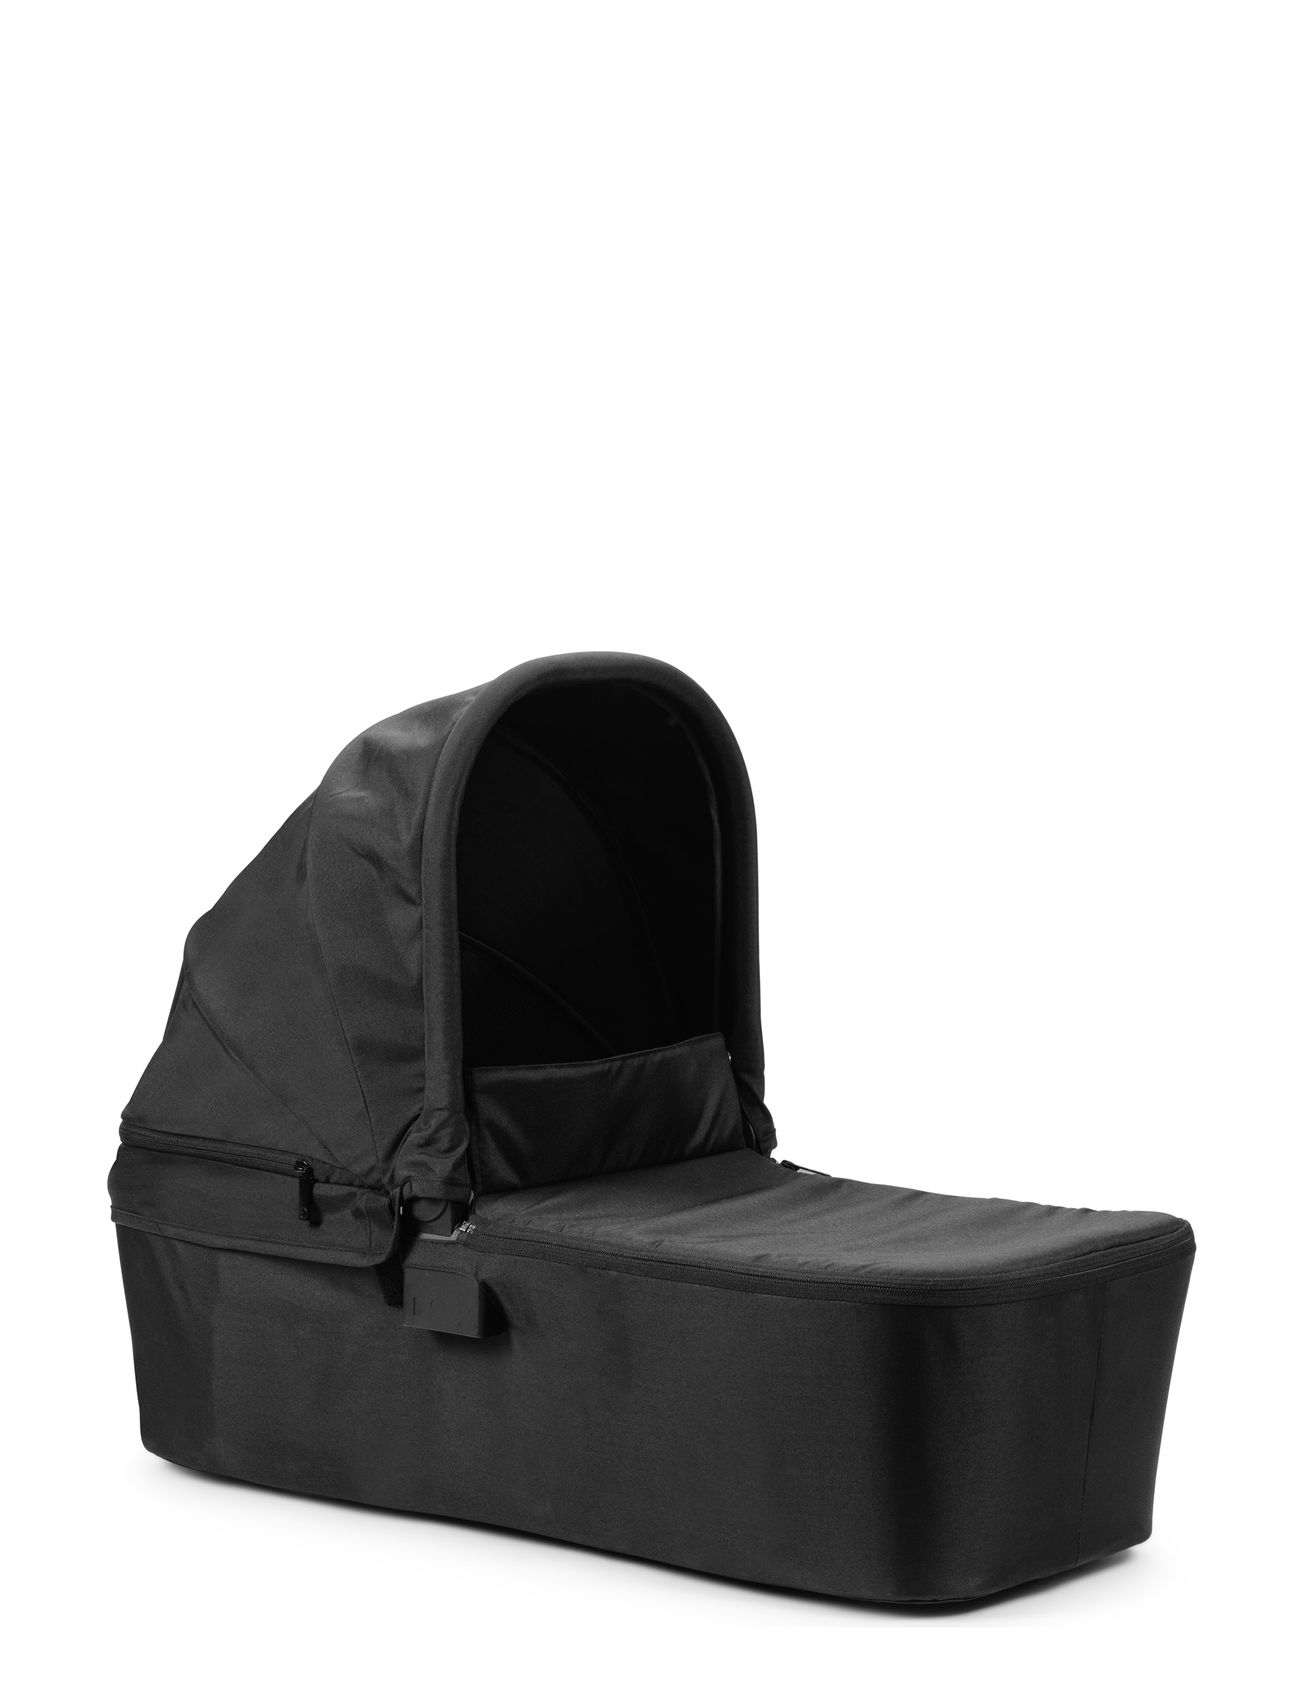 Mondo Carry Cot - Black Baby & Maternity Strollers & Accessories Stroller Accessories Black Elodie Details